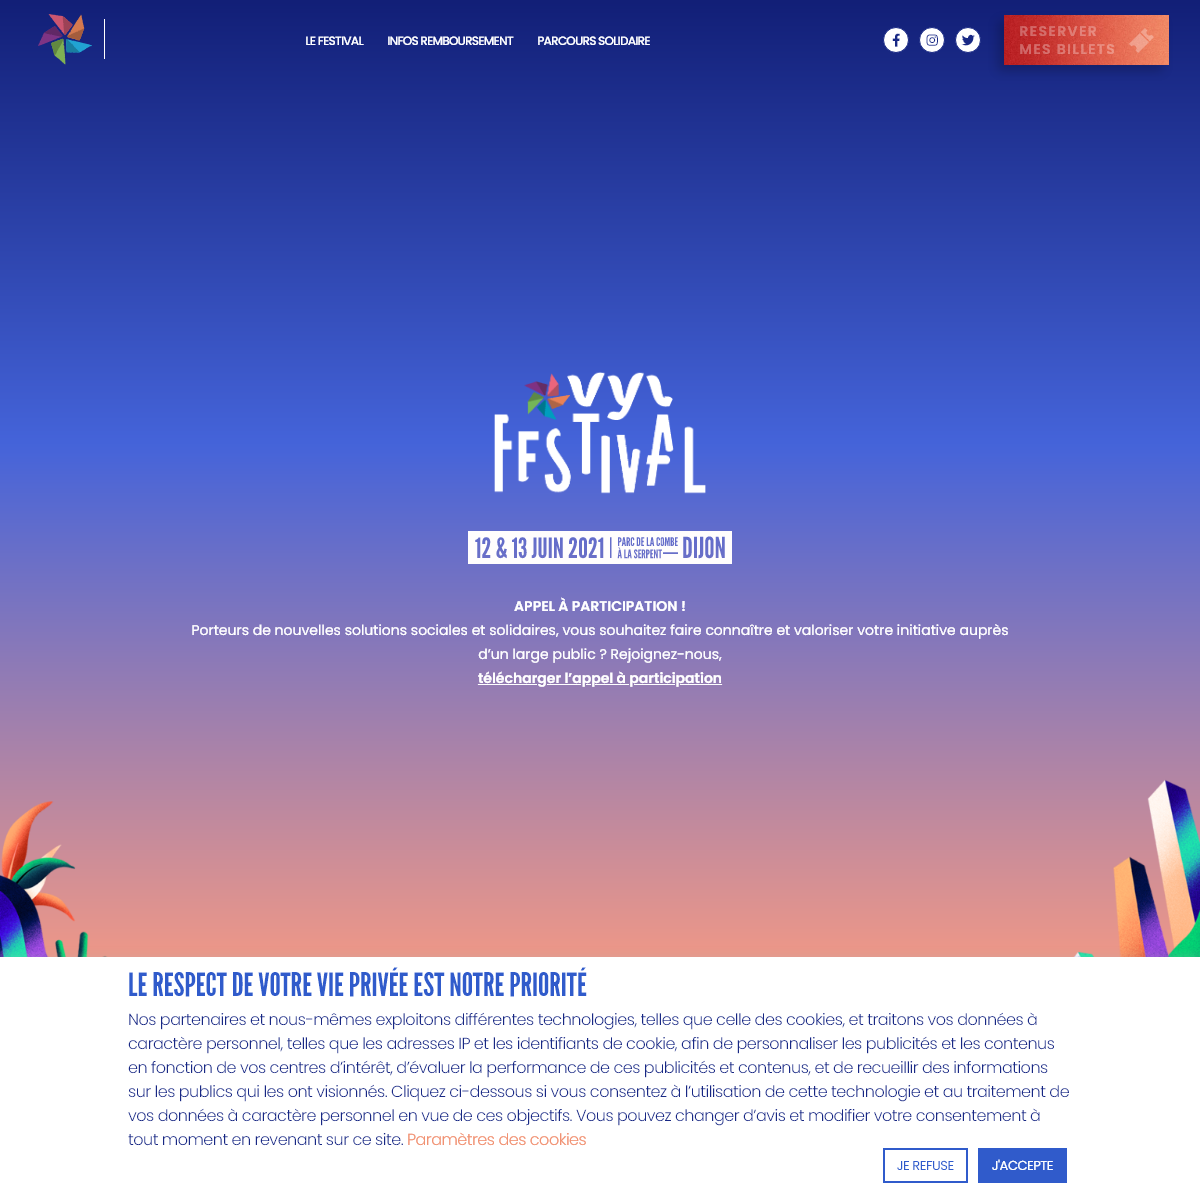 A complete backup of vyvfestival.org